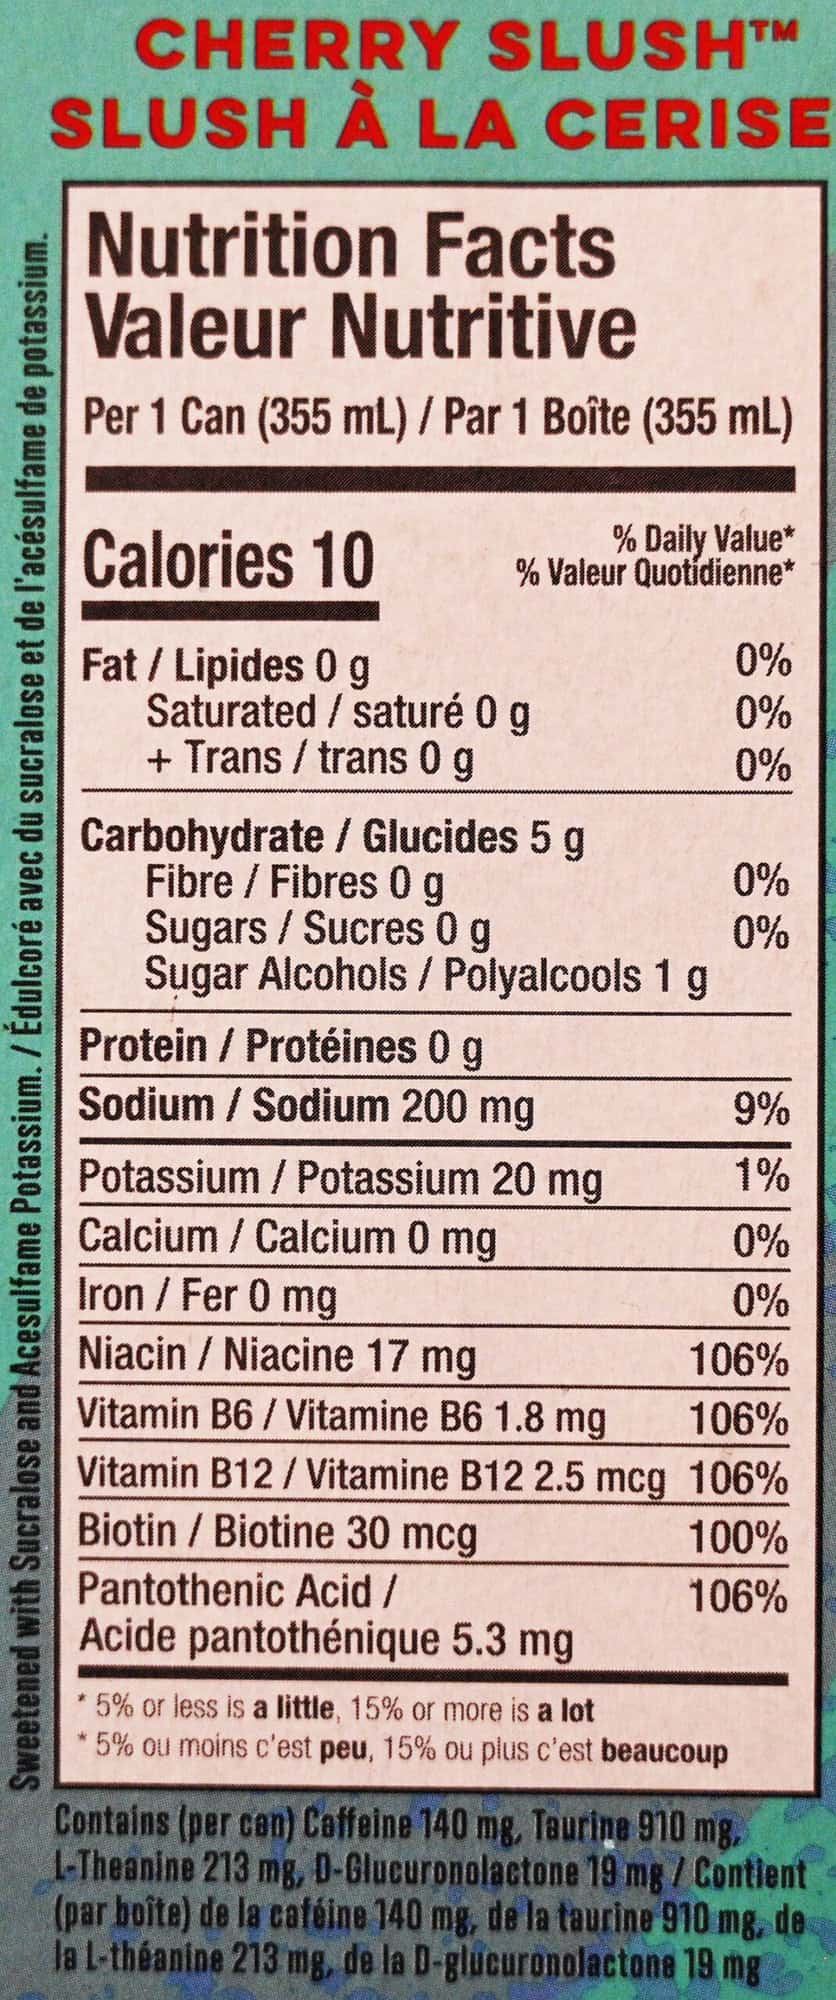 Image of the cherry slush nutrition facts from the back of the box.